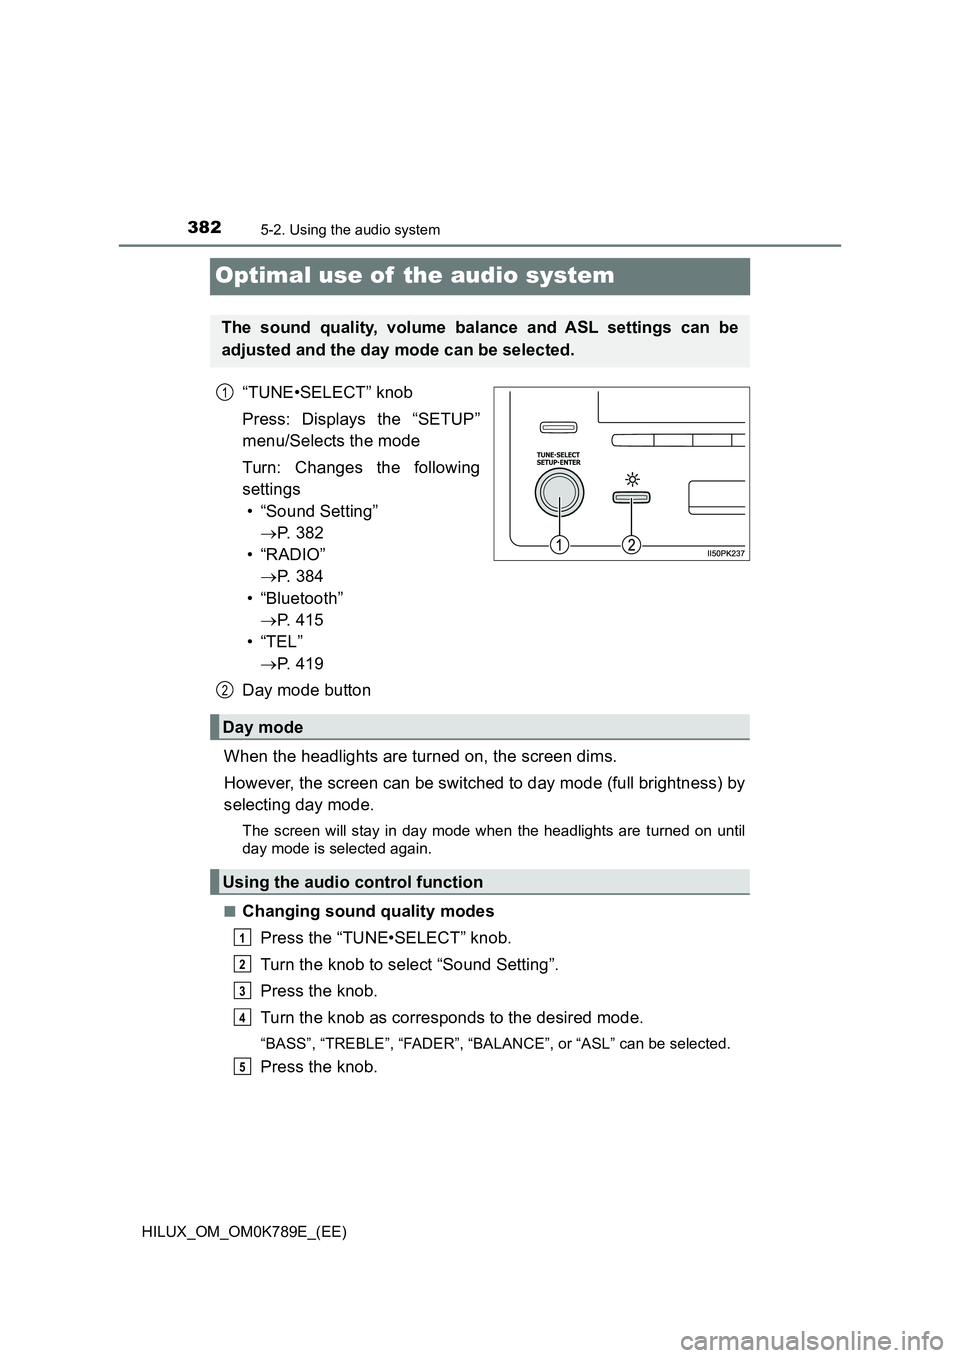 TOYOTA HILUX 2023  Owners Manual 3825-2. Using the audio system
HILUX_OM_OM0K789E_(EE)
Optimal use of  the audio system
“TUNE•SELECT” knob 
Press: Displays the “SETUP” 
menu/Selects the mode 
Turn: Changes the following 
se